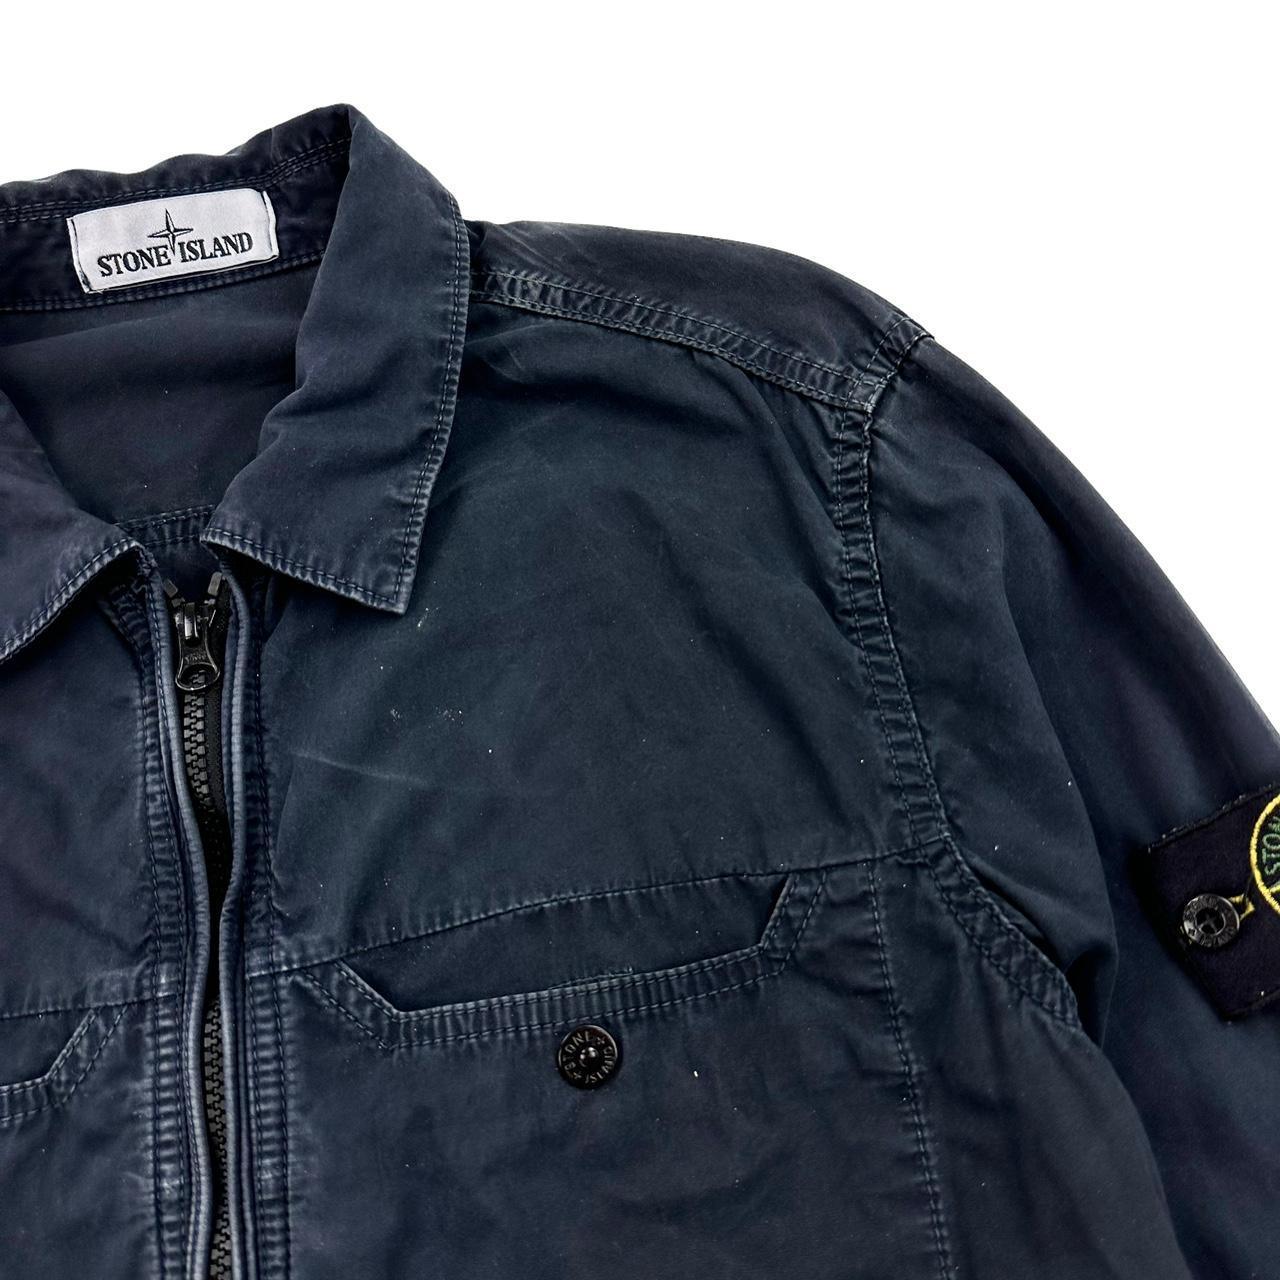 Stone Island Over Shirt Size S - Known Source